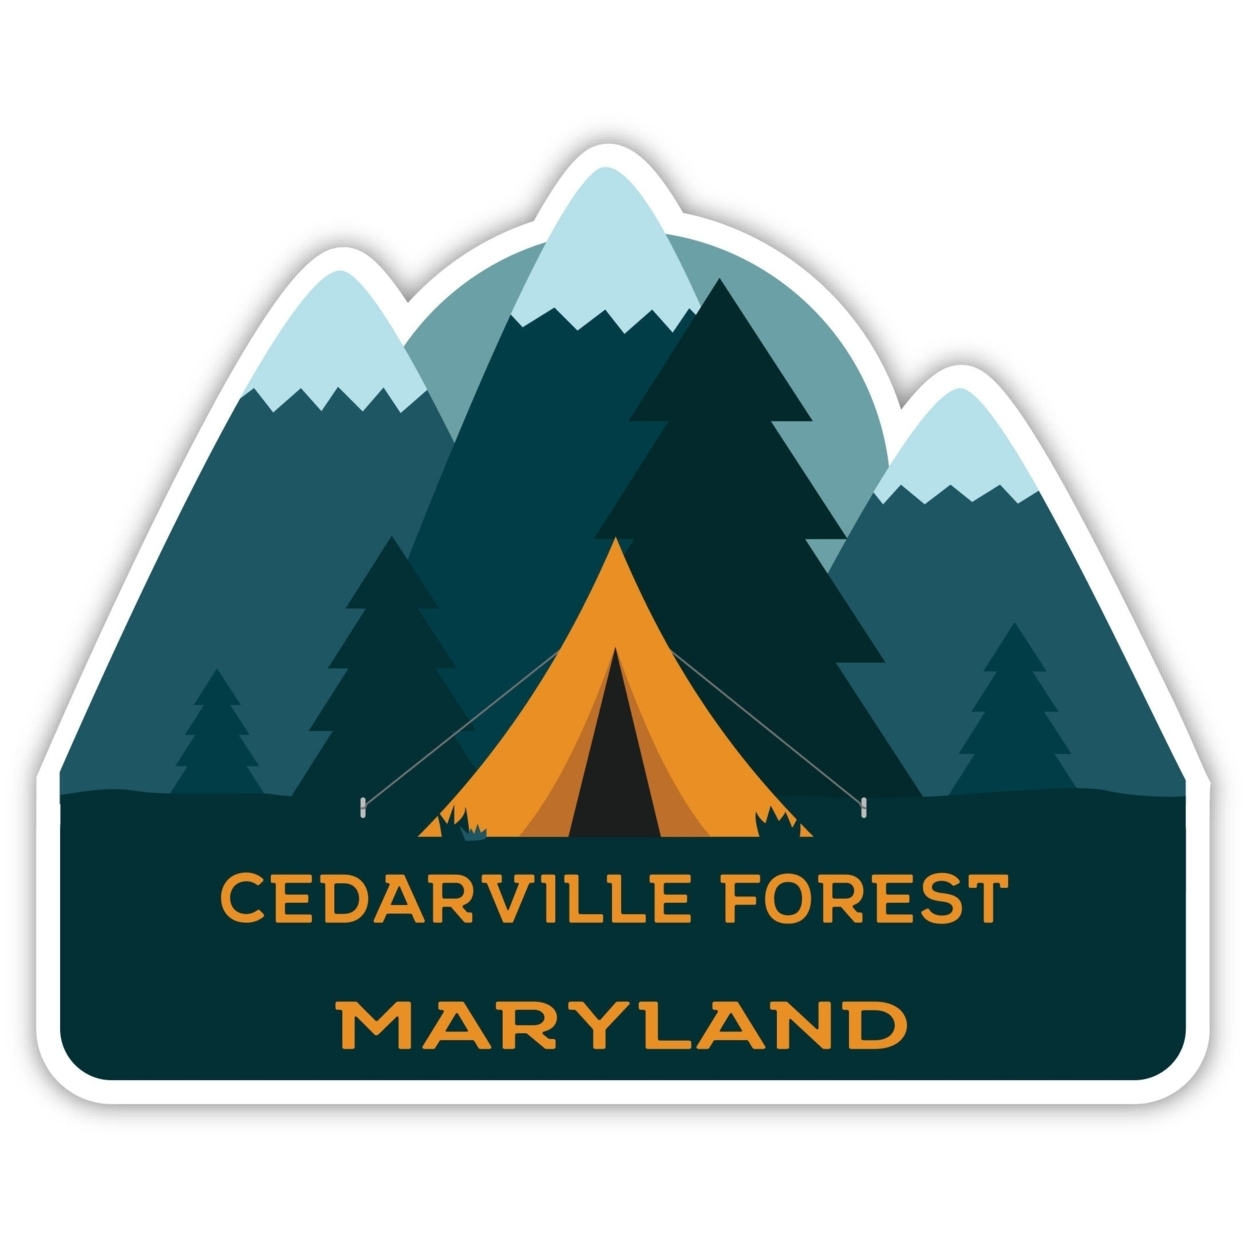 Cedarville Forest Maryland Souvenir Decorative Stickers (Choose Theme And Size) - 4-Pack, 10-Inch, Tent